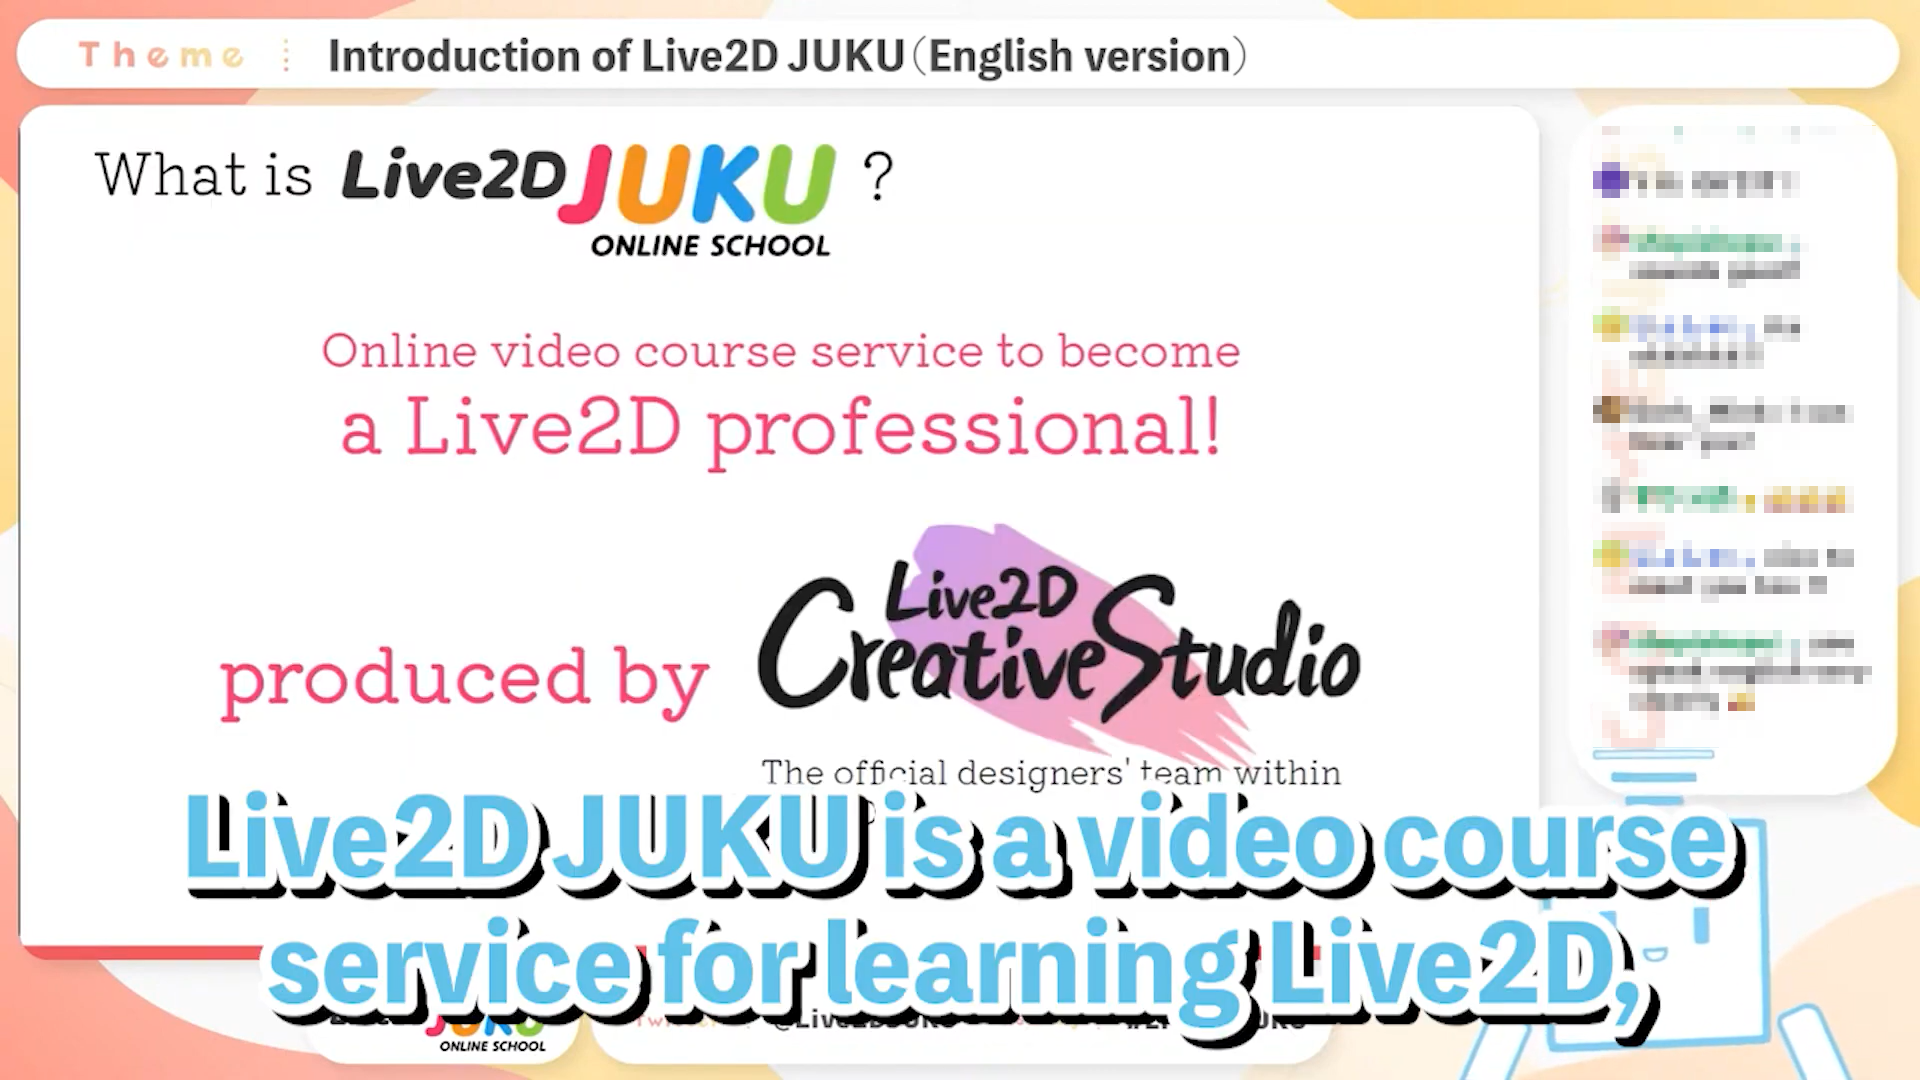 What is Live2D JUKU？